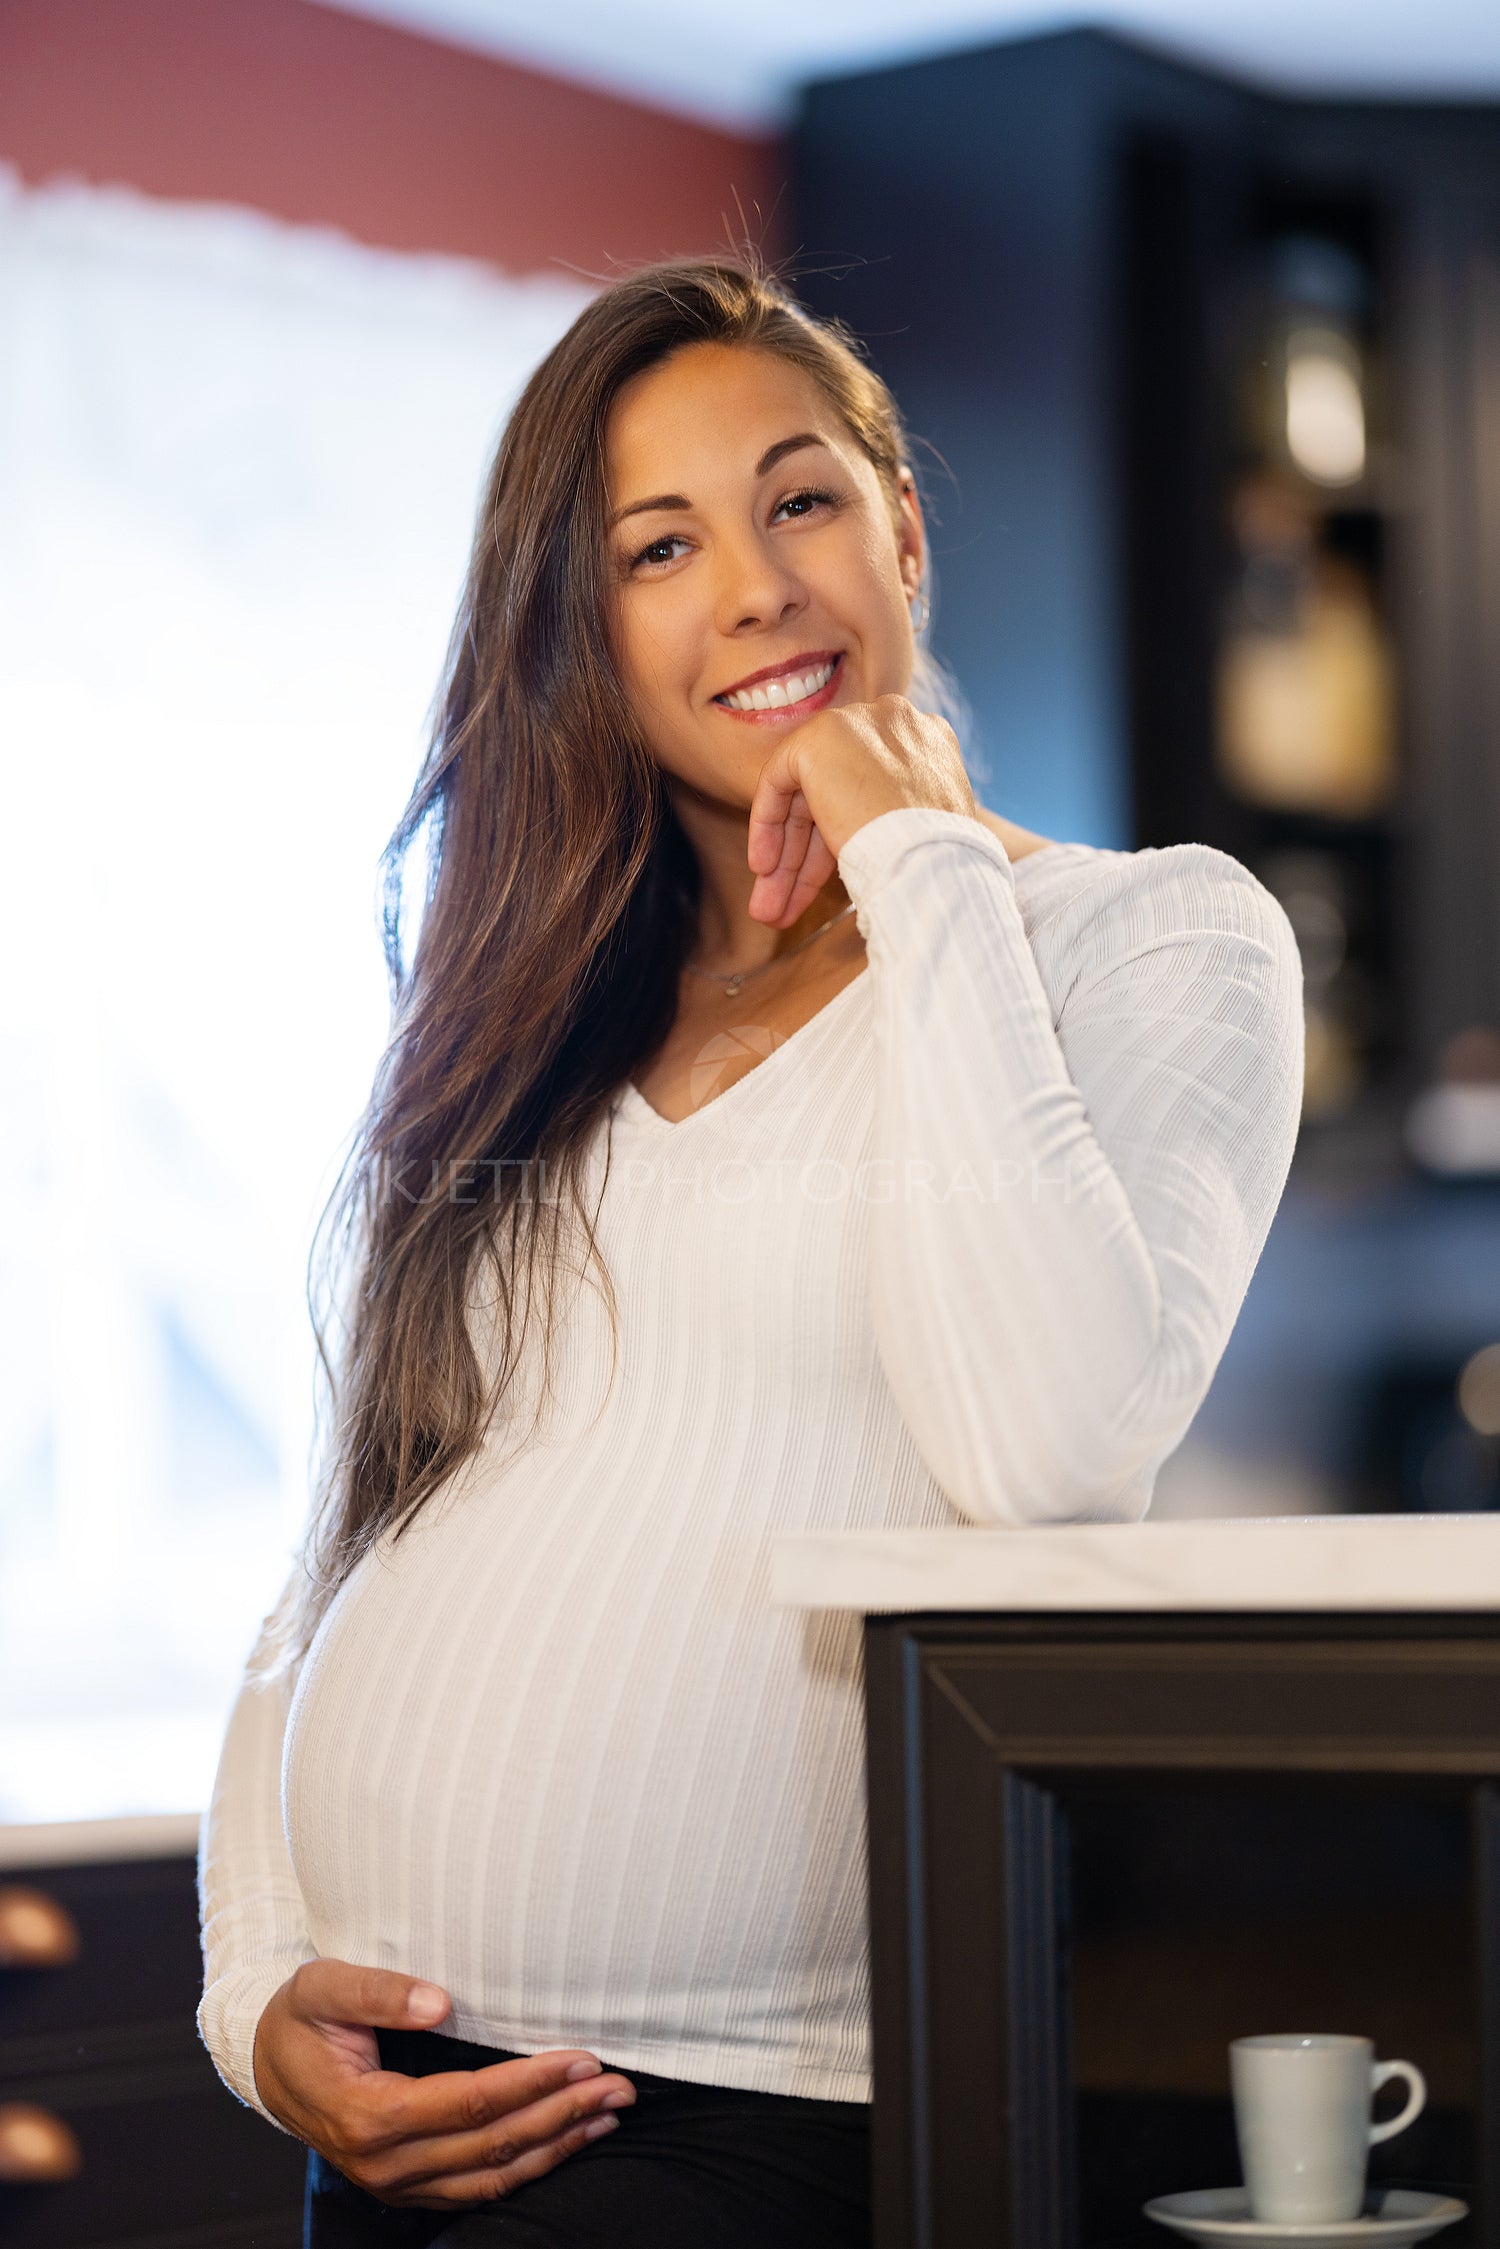 Smiling Pregnant Woman Touching Her Pregnant Belly in the Kitchen